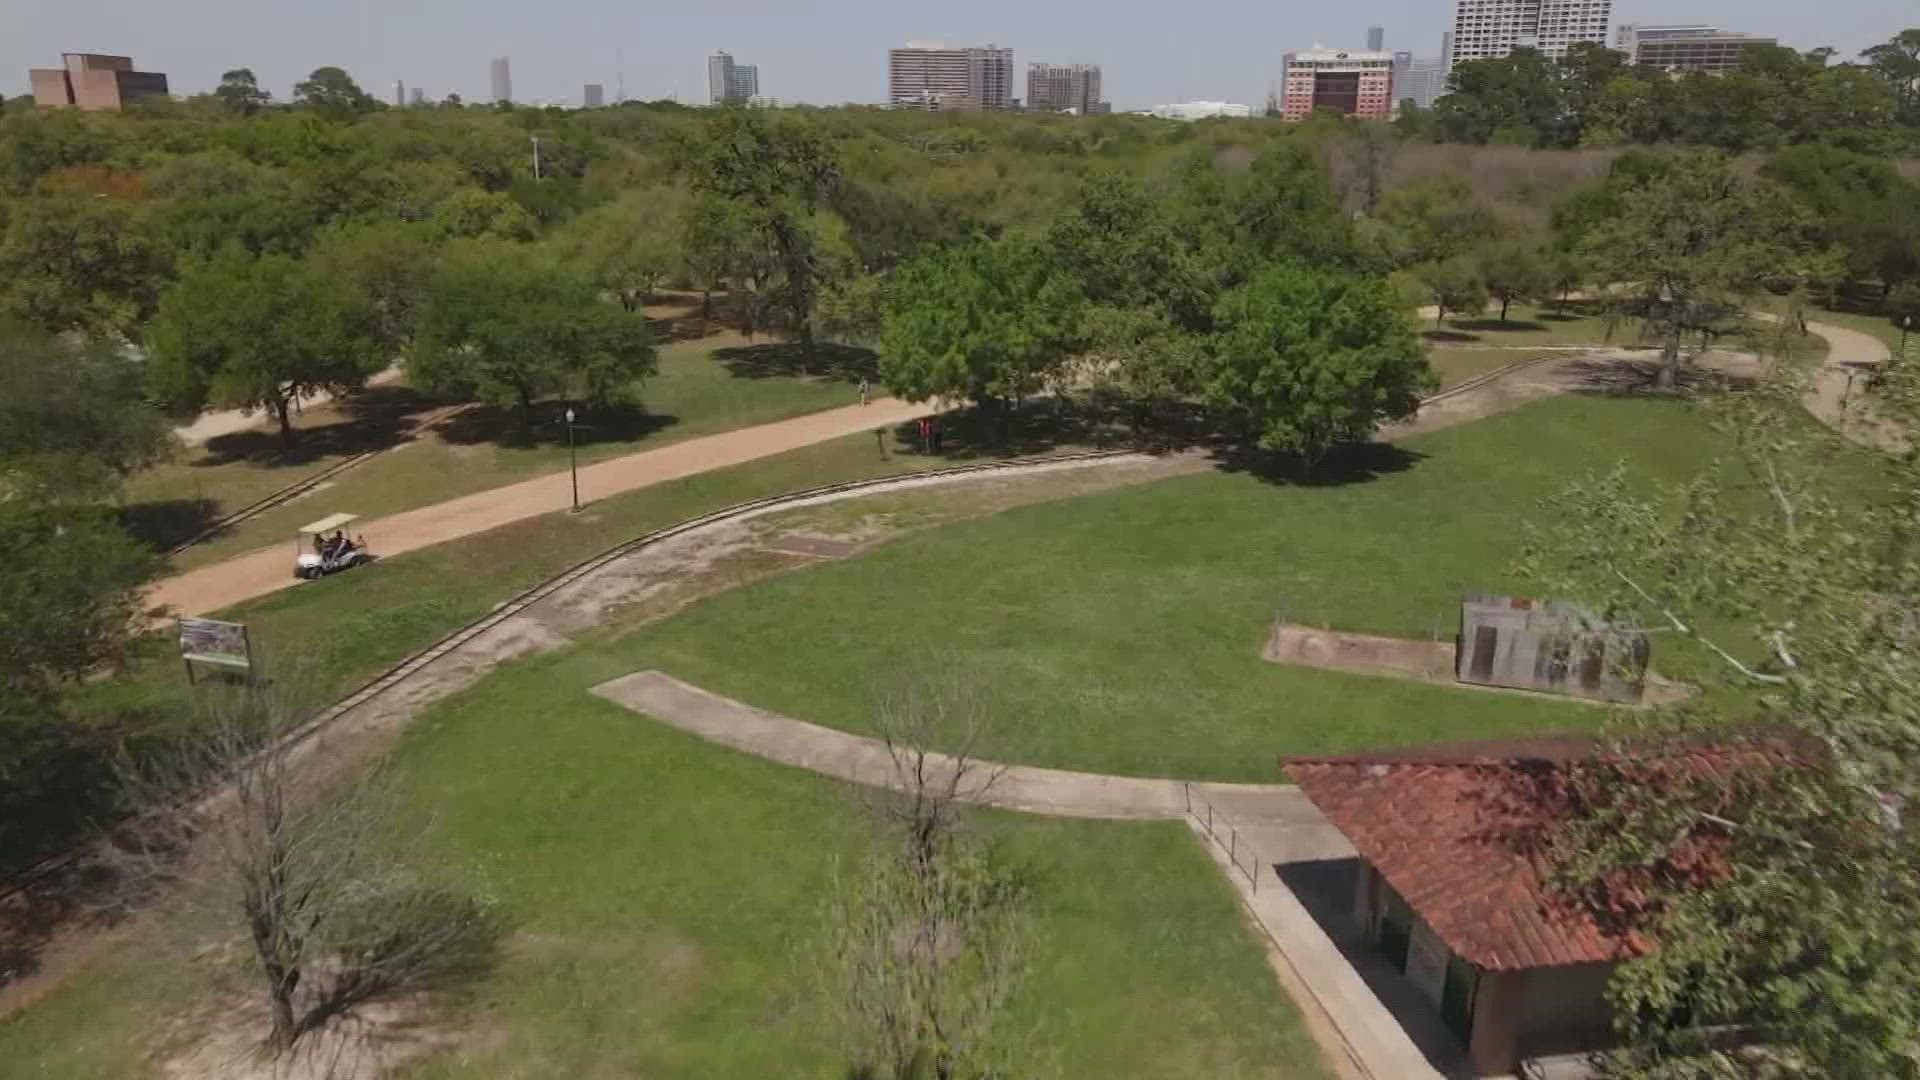 Hermann Park could be your next favorite spot to spend a Saturday afternoon after it completes the next phase of its 20-year master plan.